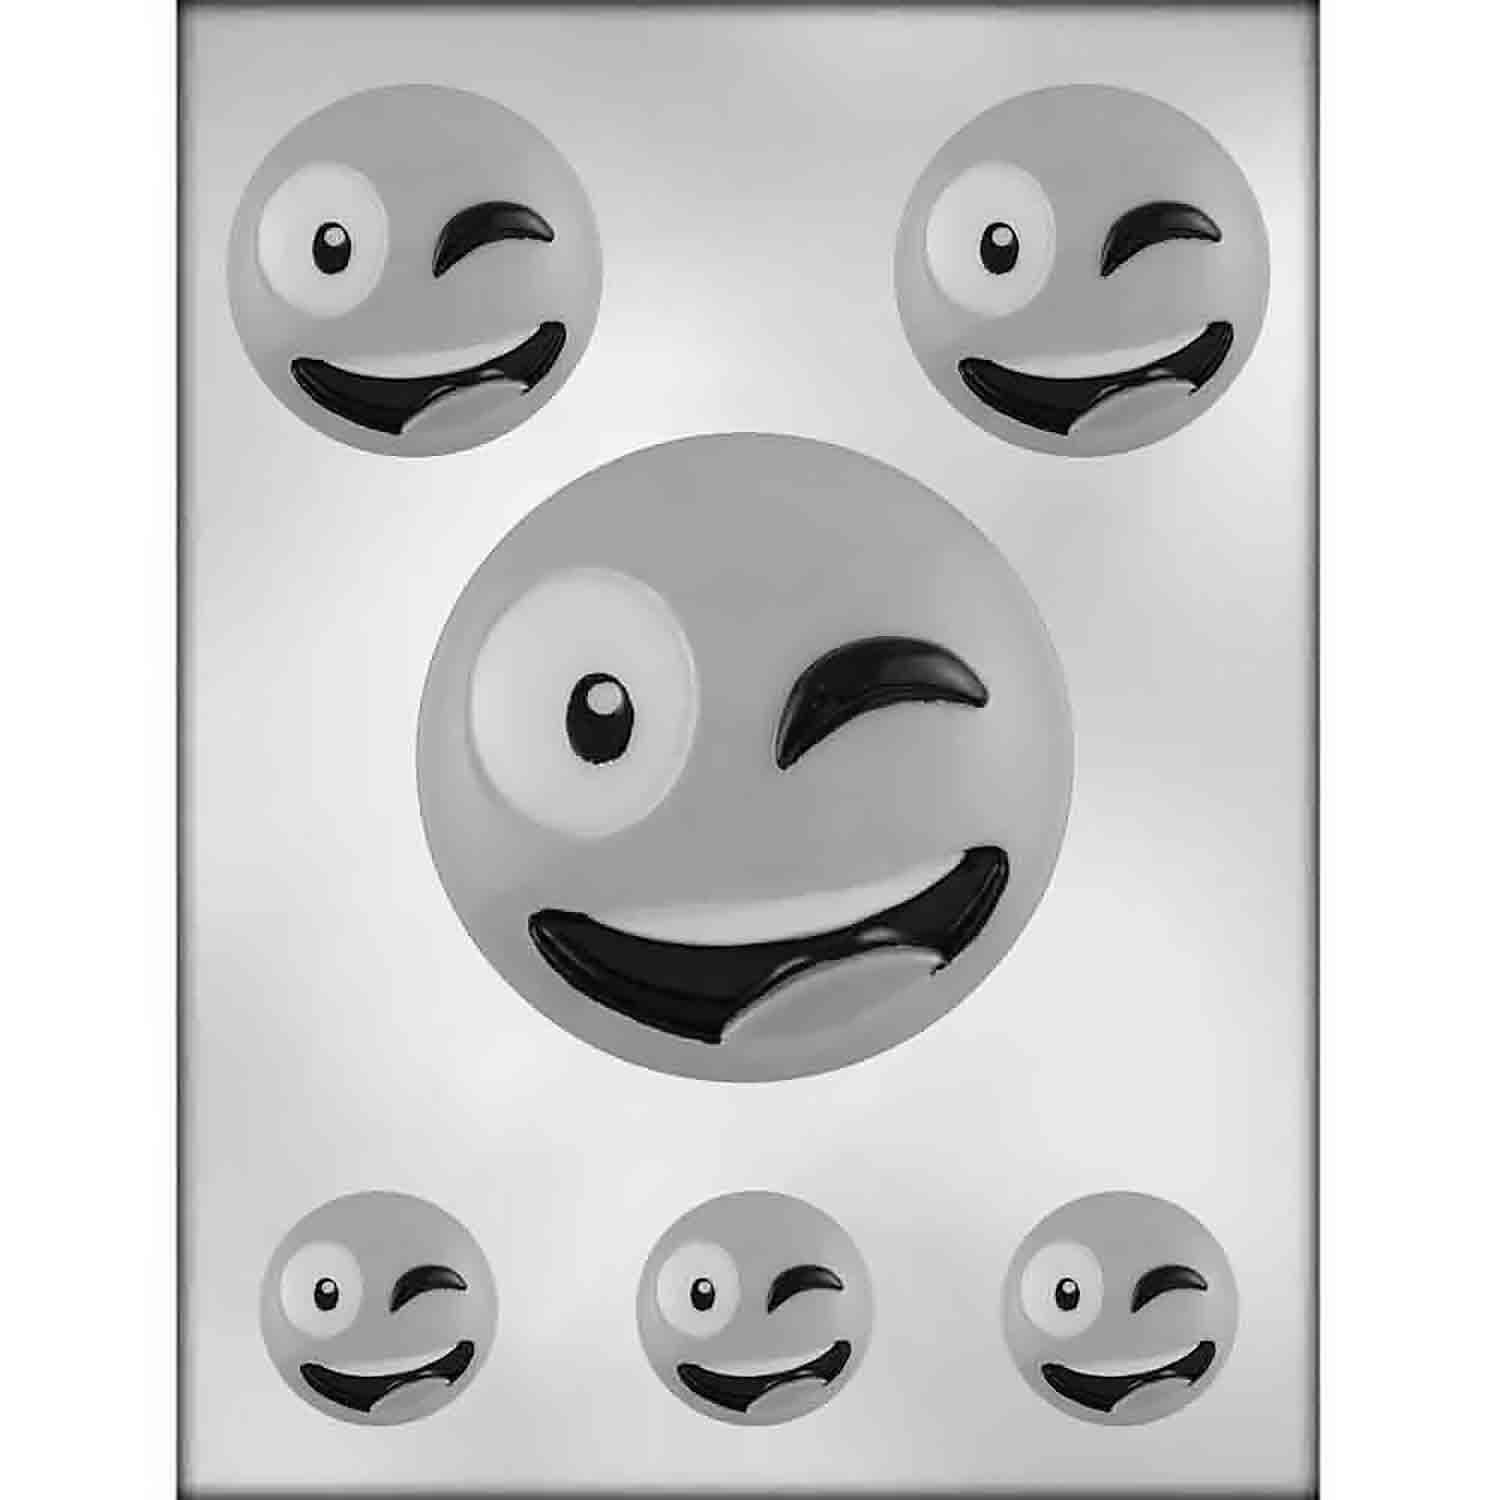 Wink Expression Chocolate Mold